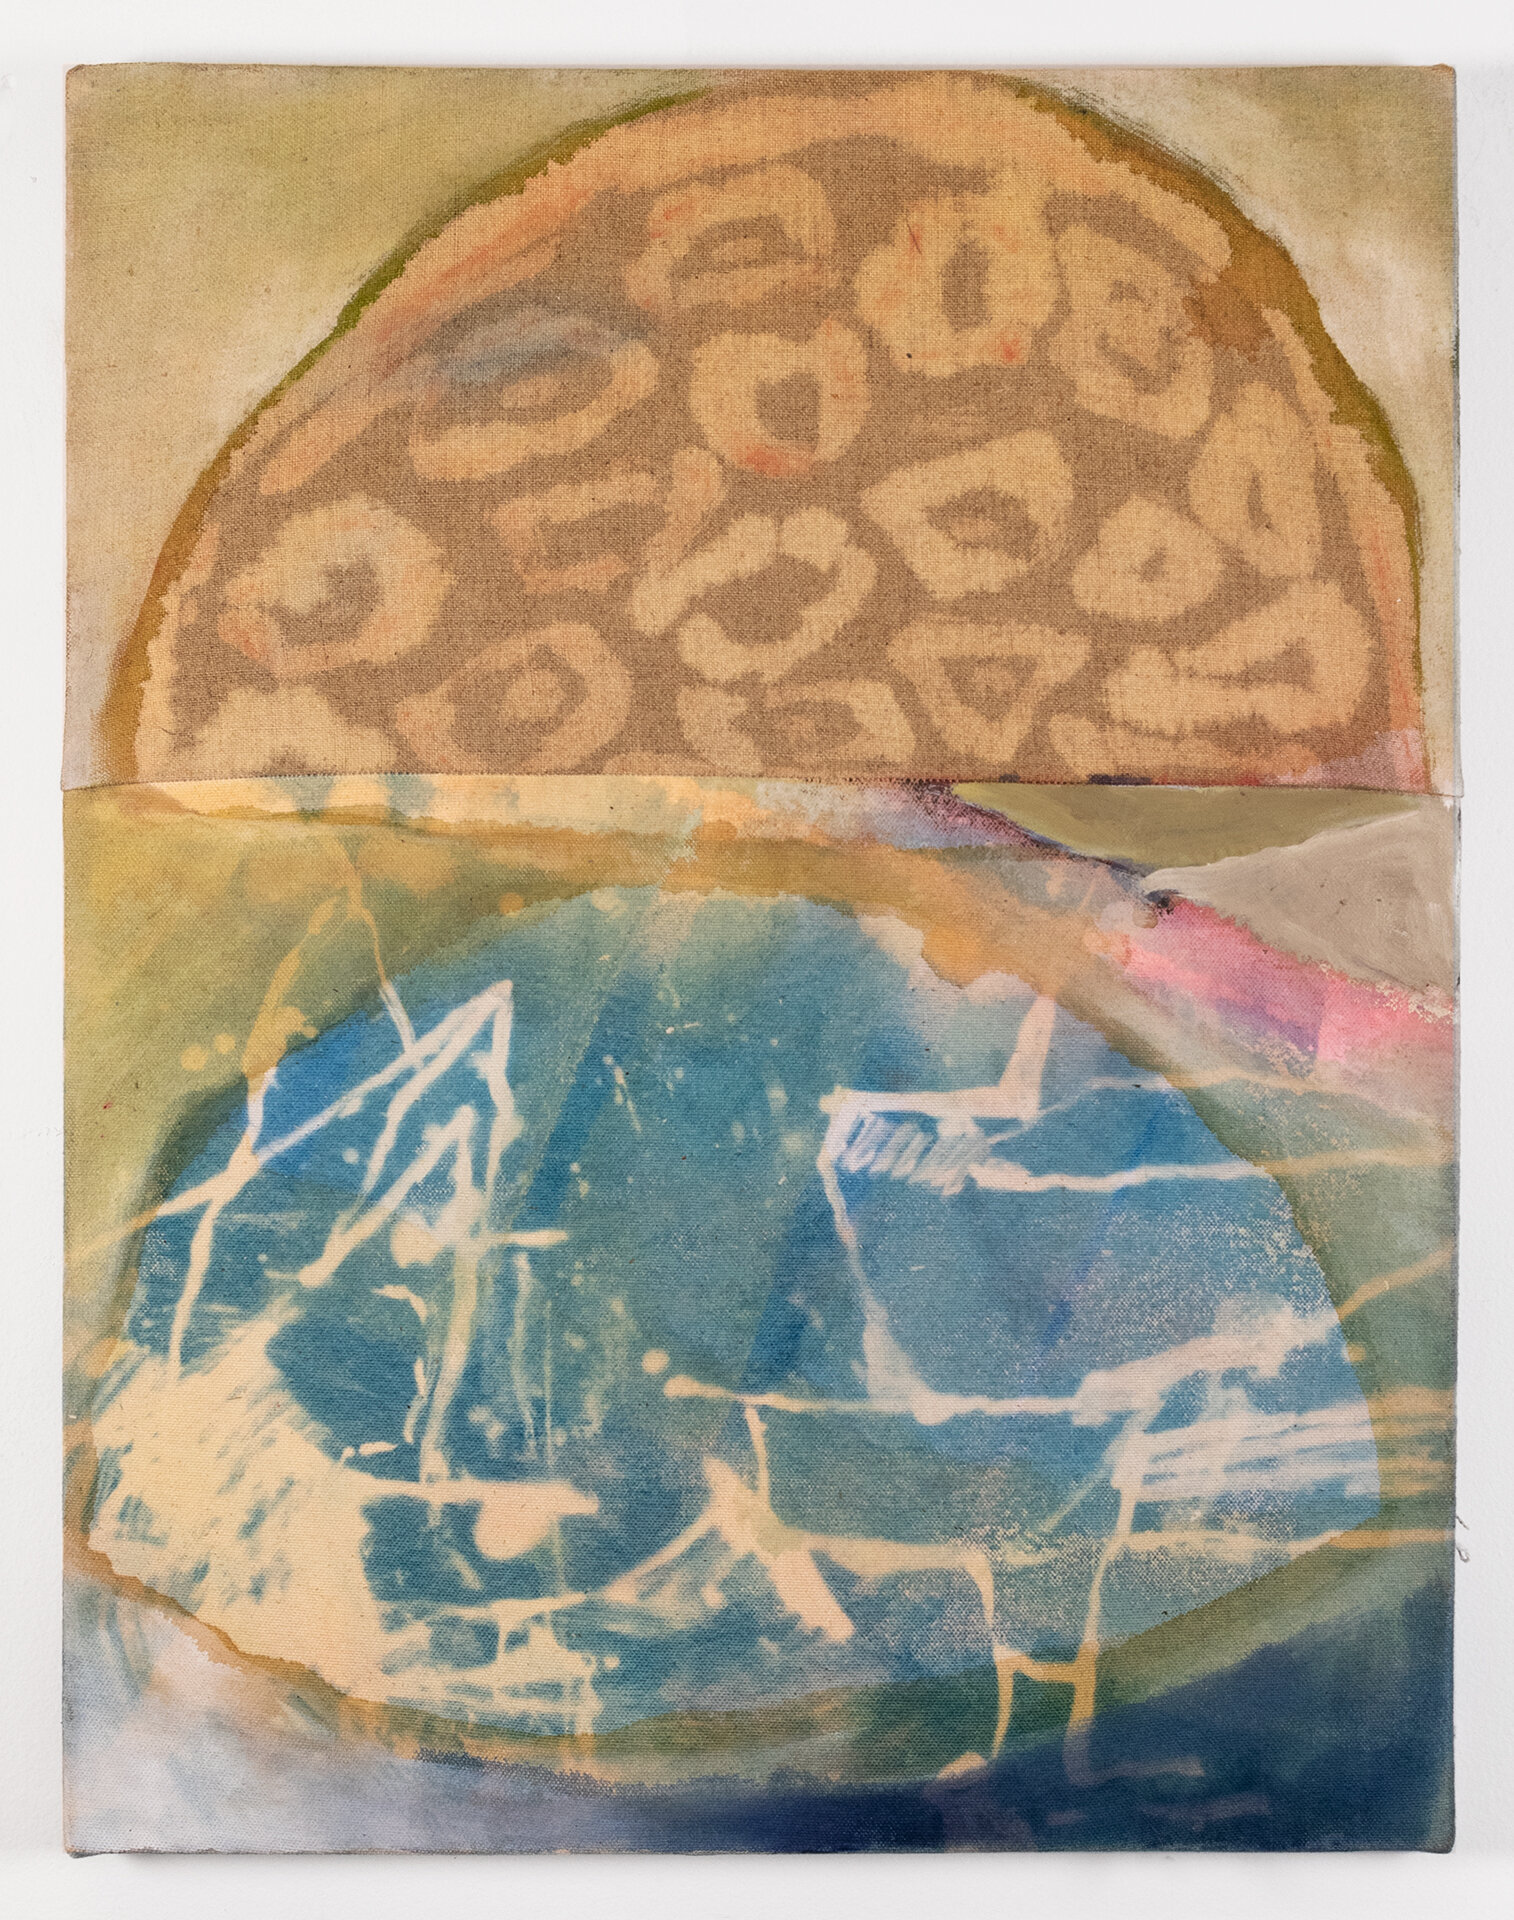   Both Halves   Oil, acrylic, bleach, and cyanotype on sewn canvas and linen  20 x 16 in.  2019    